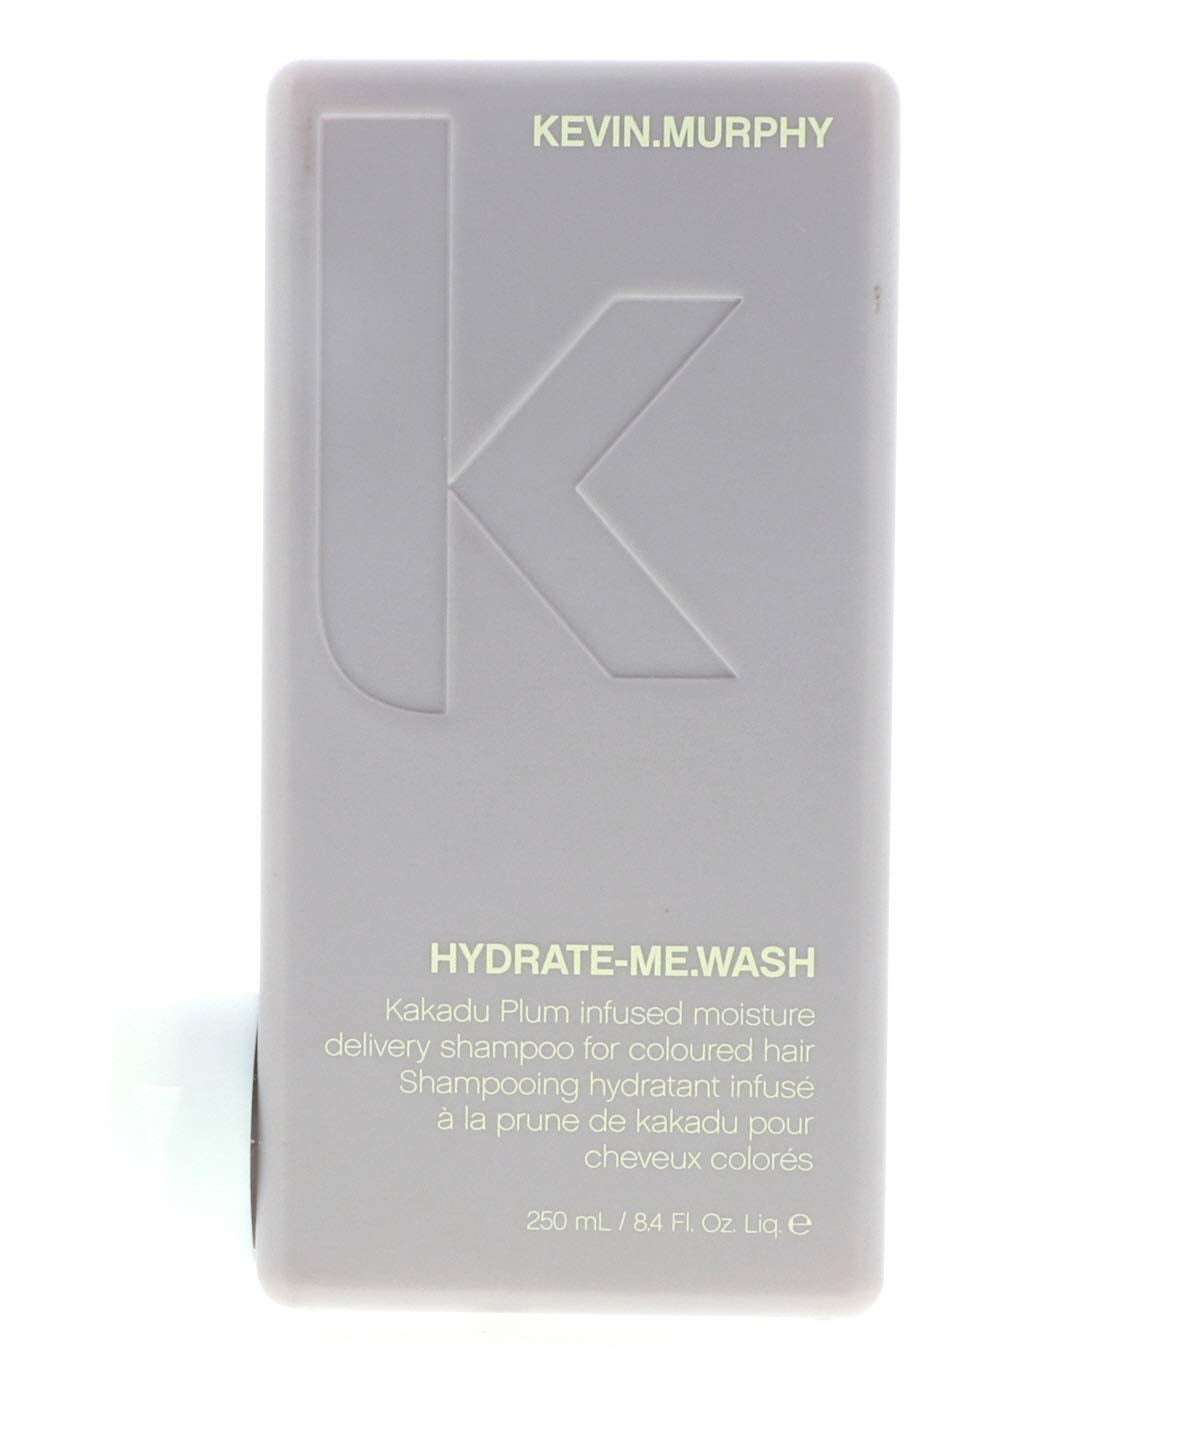 KEVIN MURPHY Hydrate Me Wash Kakadu Plum Infused Moisture Delivery SHAMPOO for Coloured Hair 8.4 oz